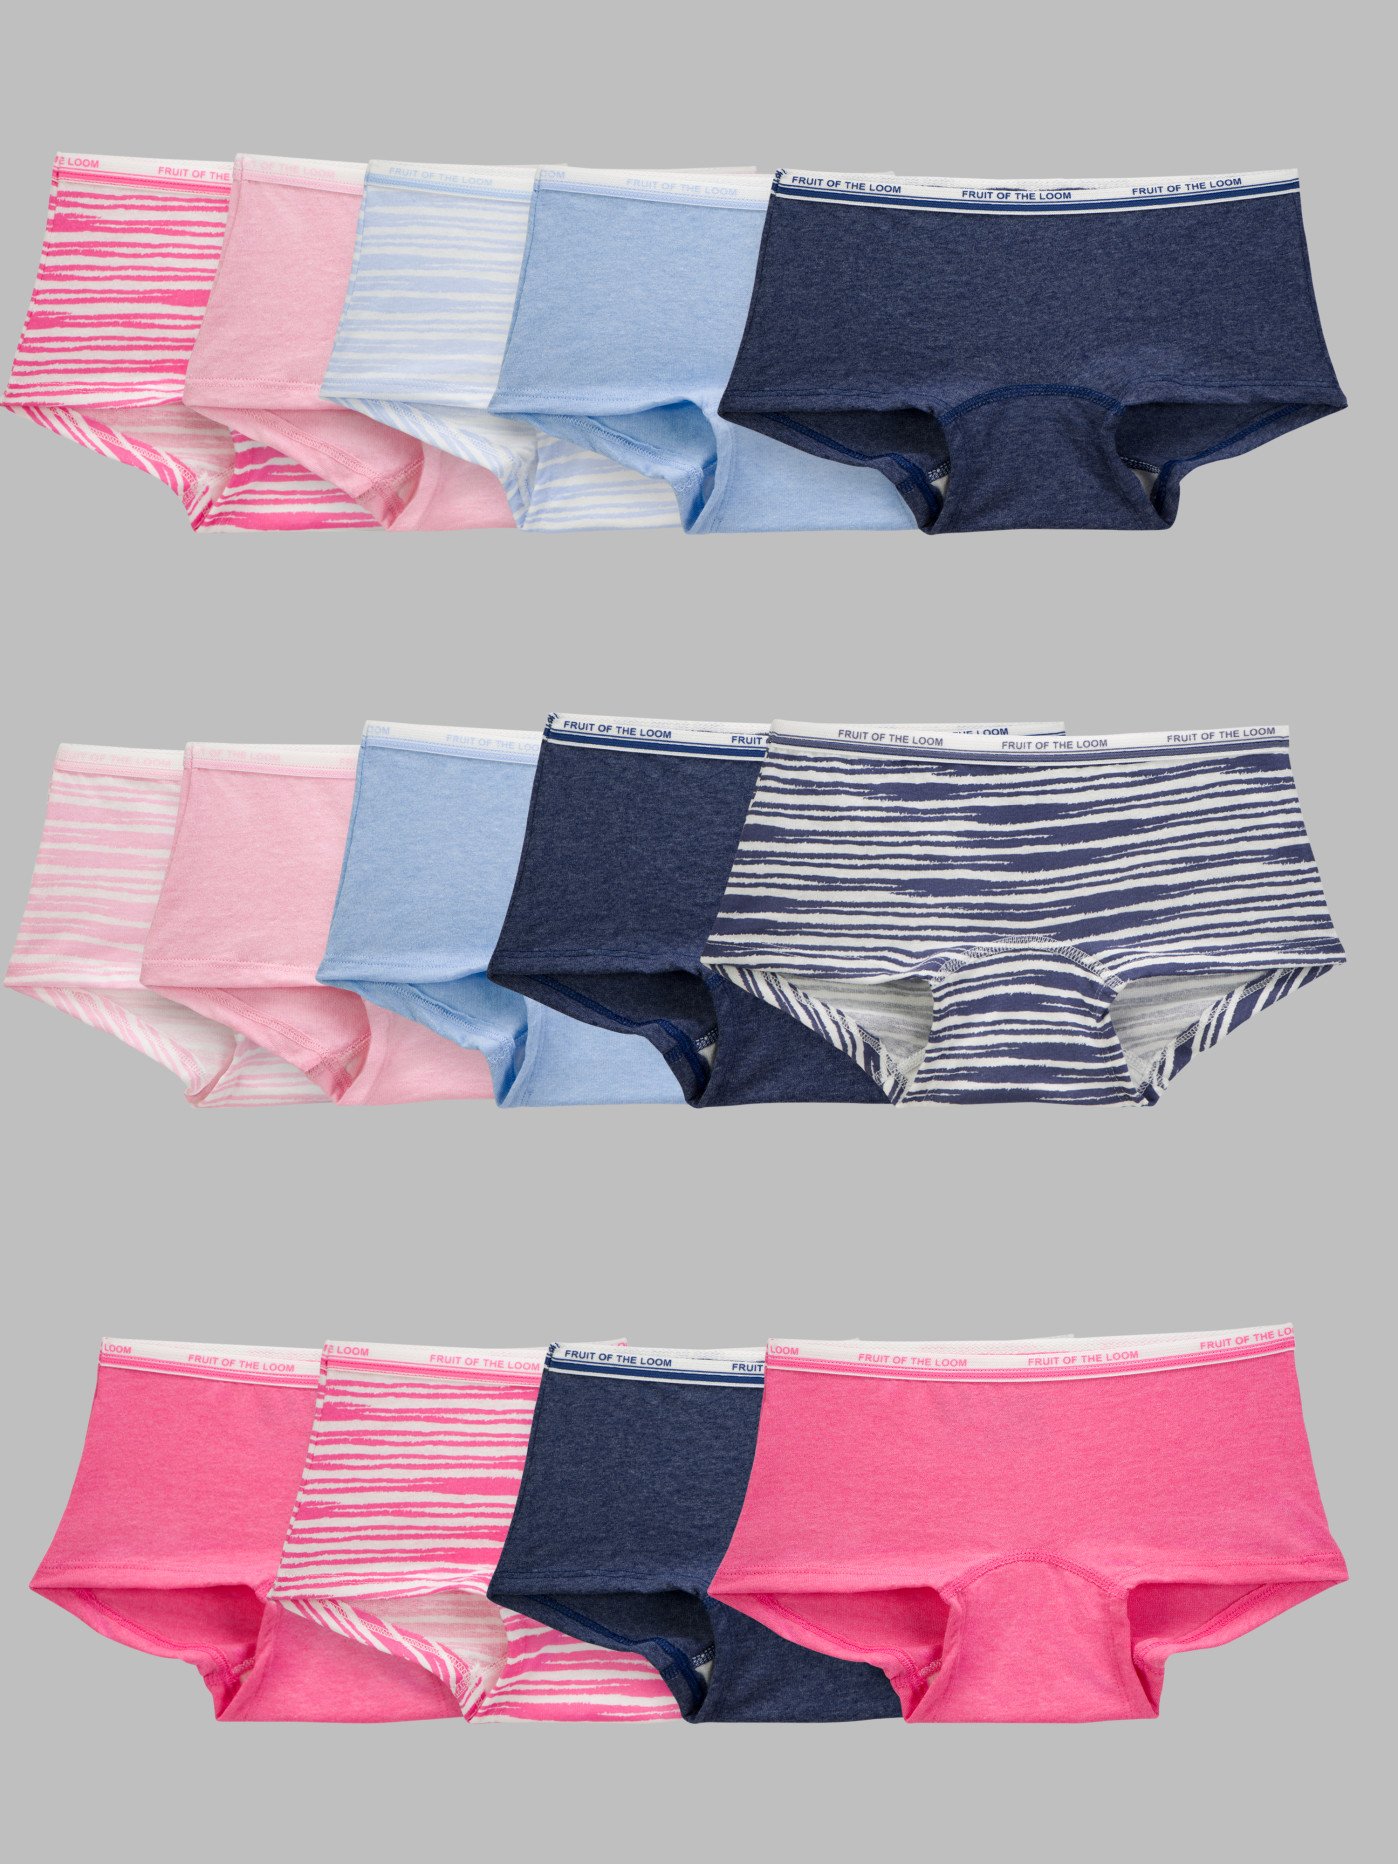 16 Pieces Fruit Of The Loom Women's Seamless Boy Shorts 3-Pack